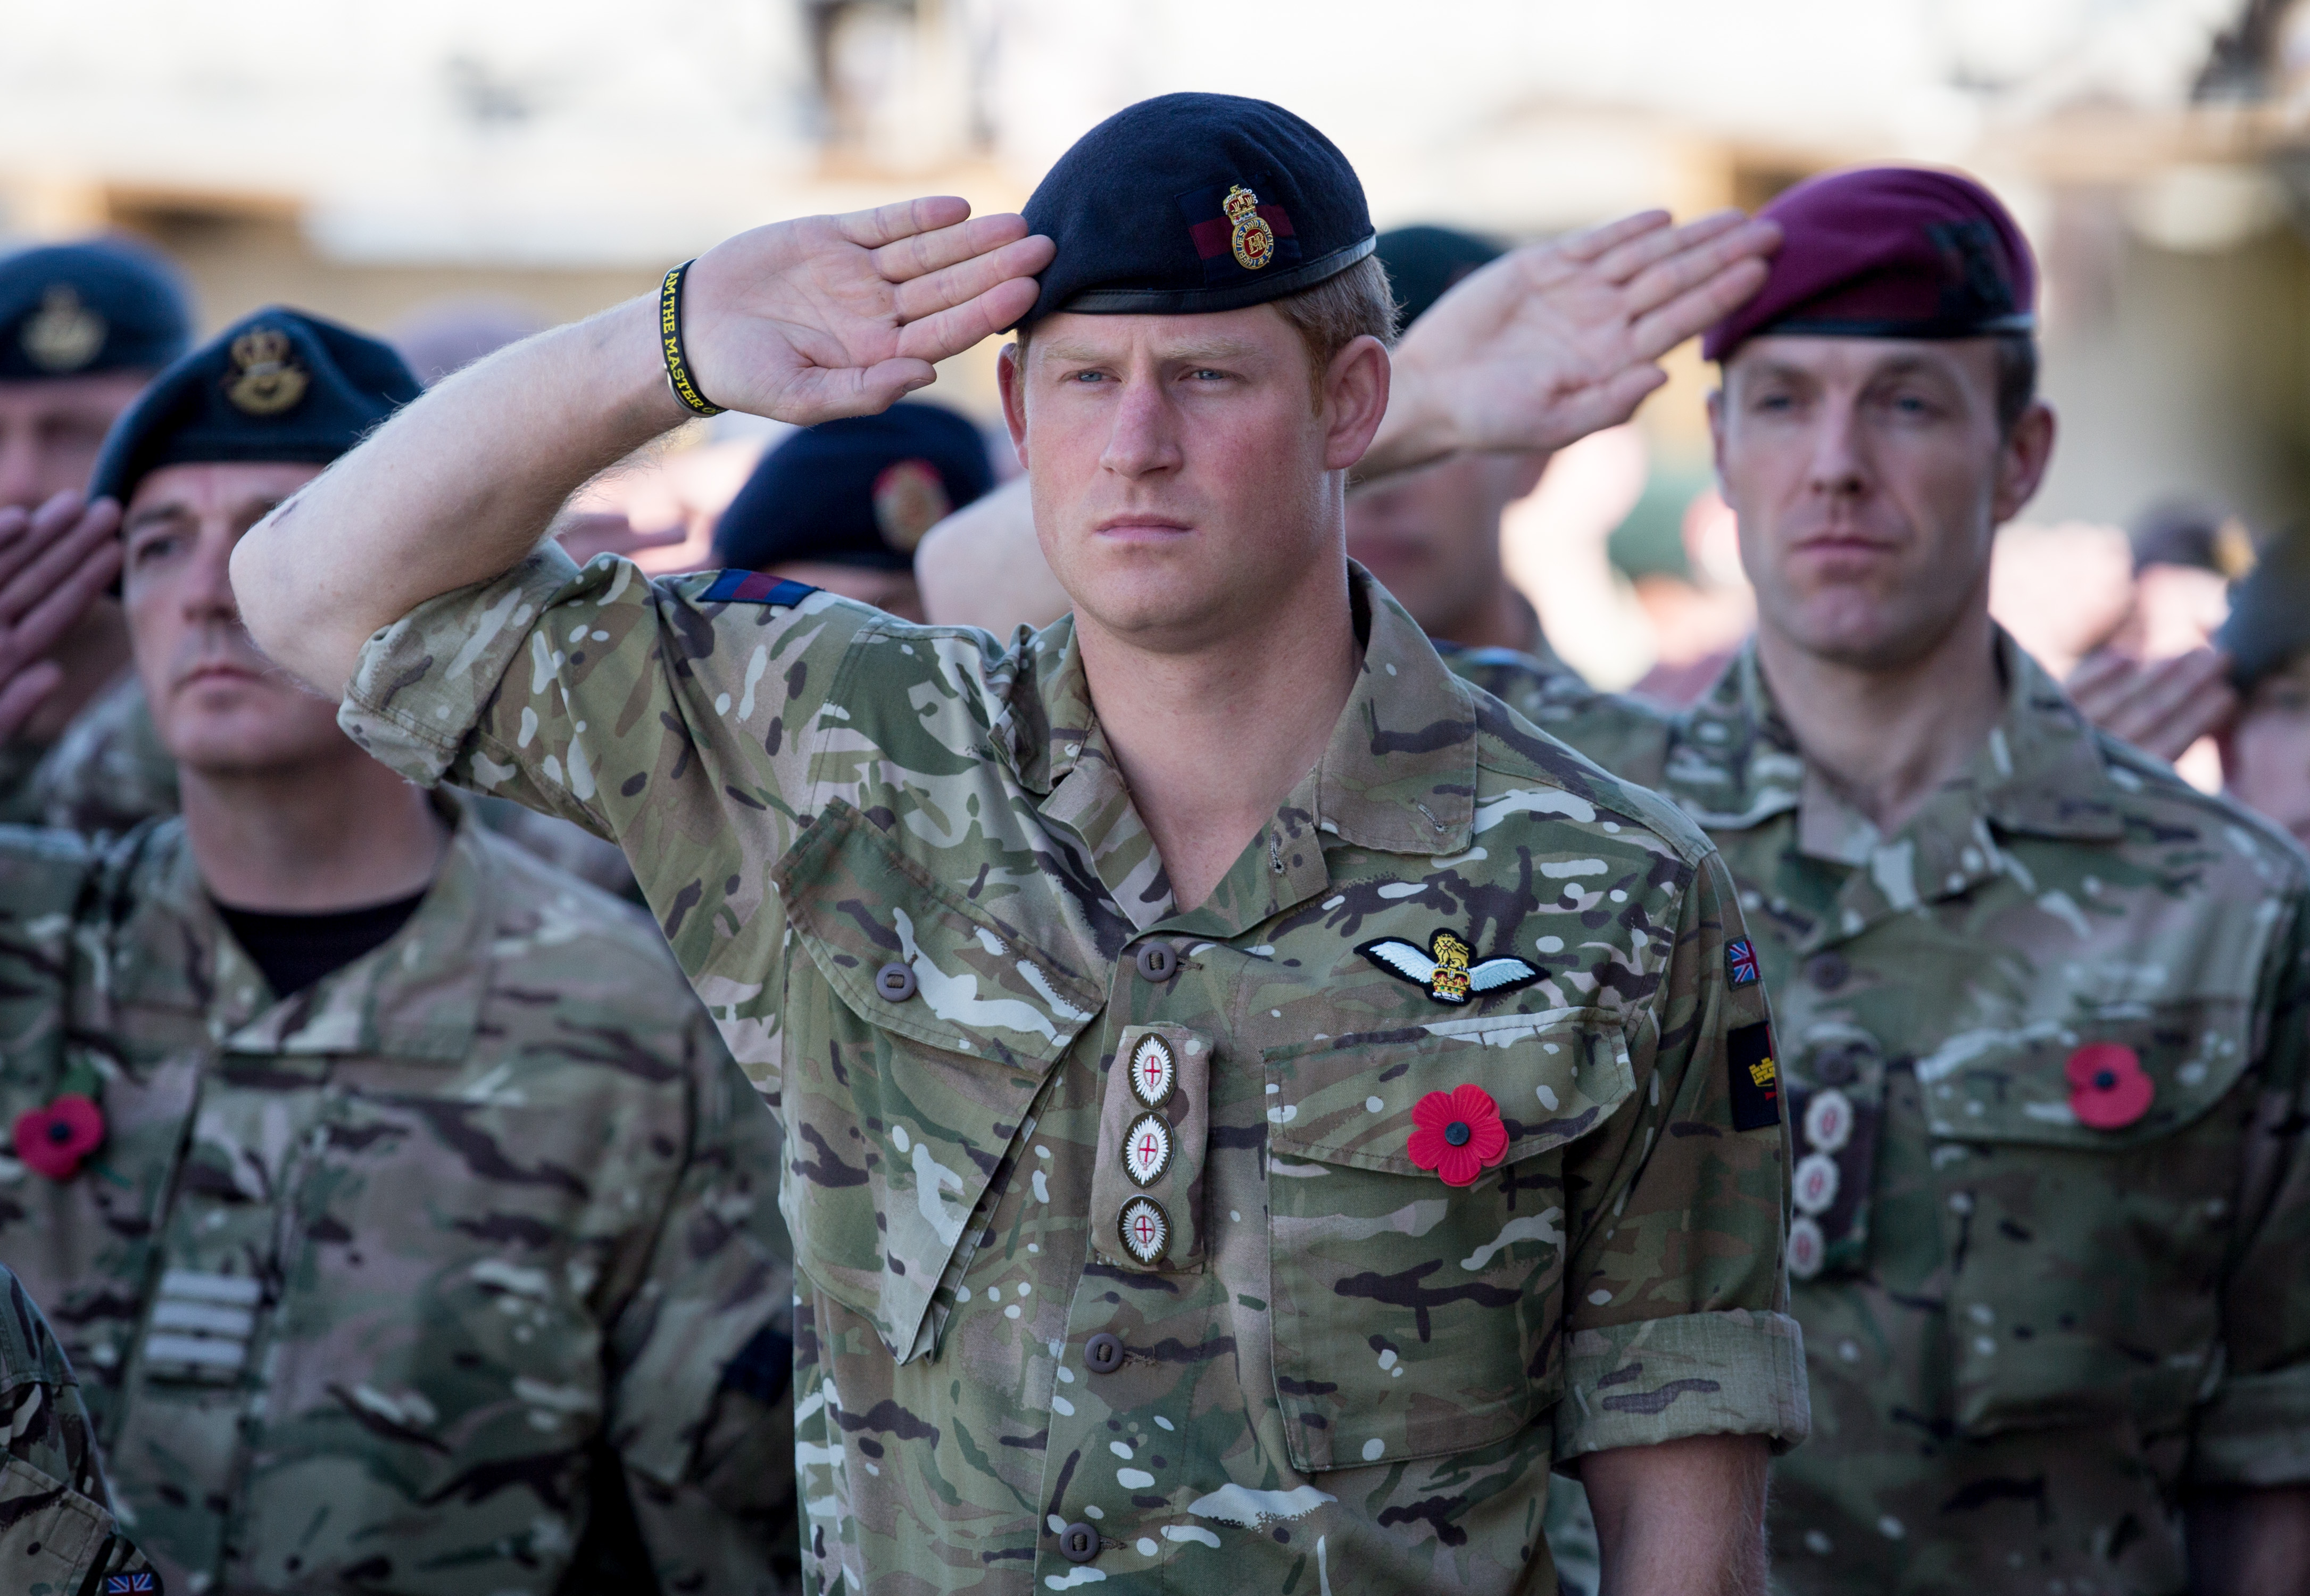 Prince Harry in uniform saluting with other British troops and service personnel